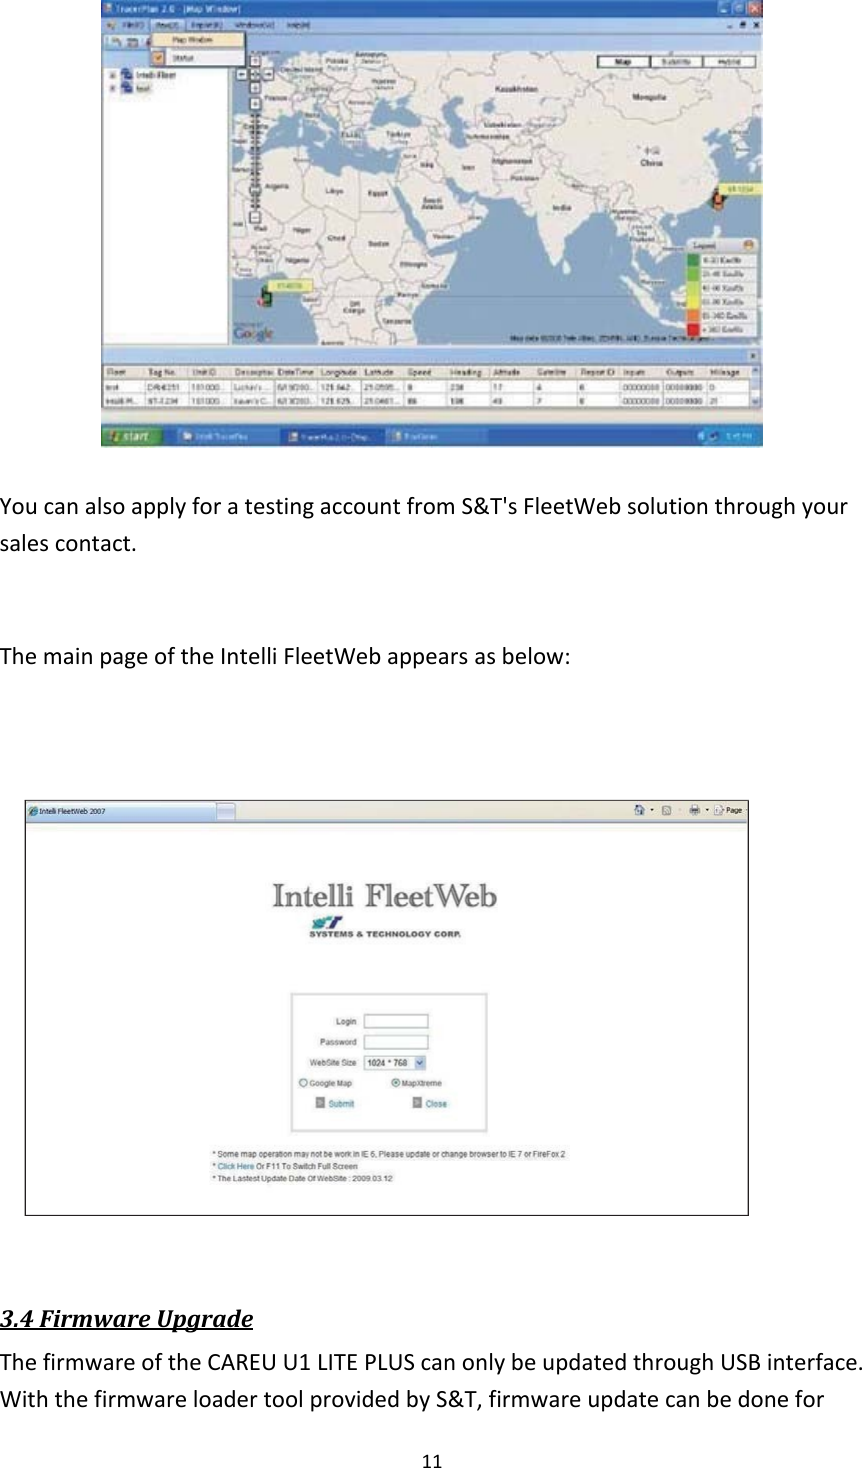  11    You can also apply for a testing account from S&amp;T&apos;s FleetWeb solution through your sales contact.   The main page of the Intelli FleetWeb appears as below:                 3.4 Firmware Upgrade The firmware of the CAREU U1 LITE PLUS can only be updated through USB interface. With the firmware loader tool provided by S&amp;T, firmware update can be done for 